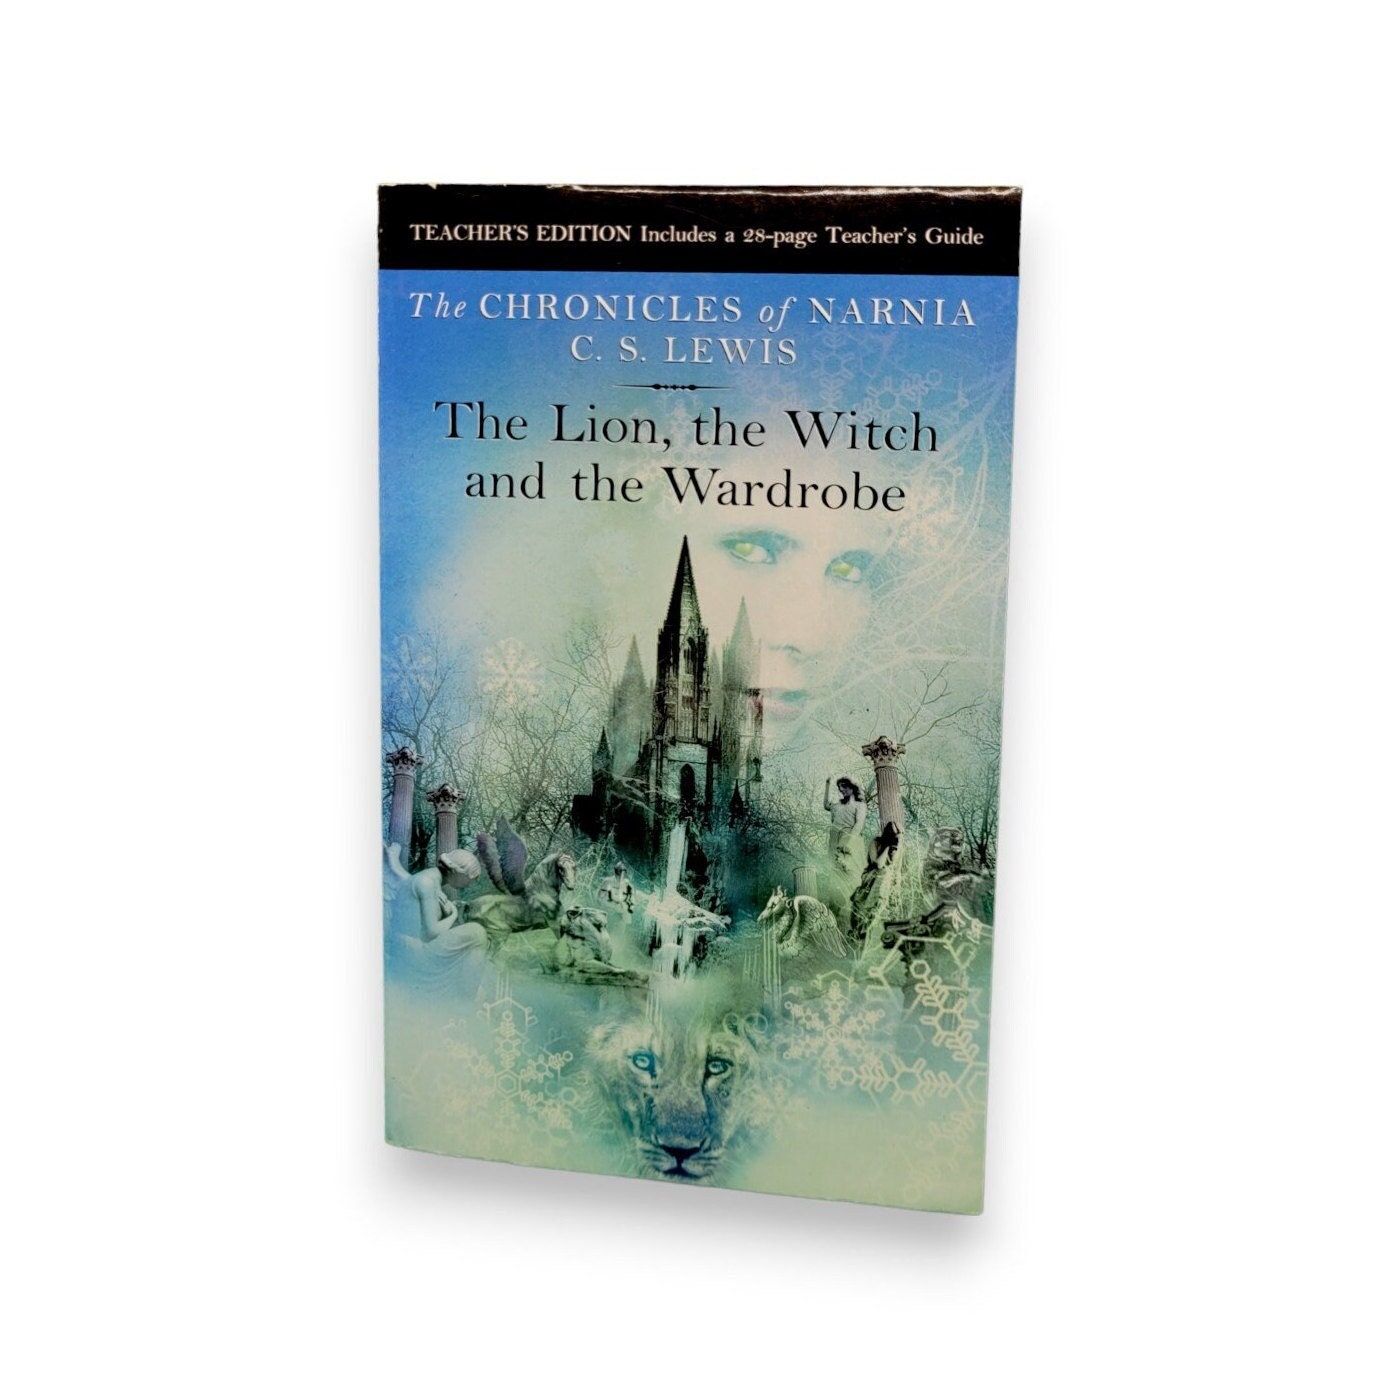 The Chronicles of Narnia: The Lion, The Witch, and the Wardrobe by CS Lewis [Teacher's Edition] 2002